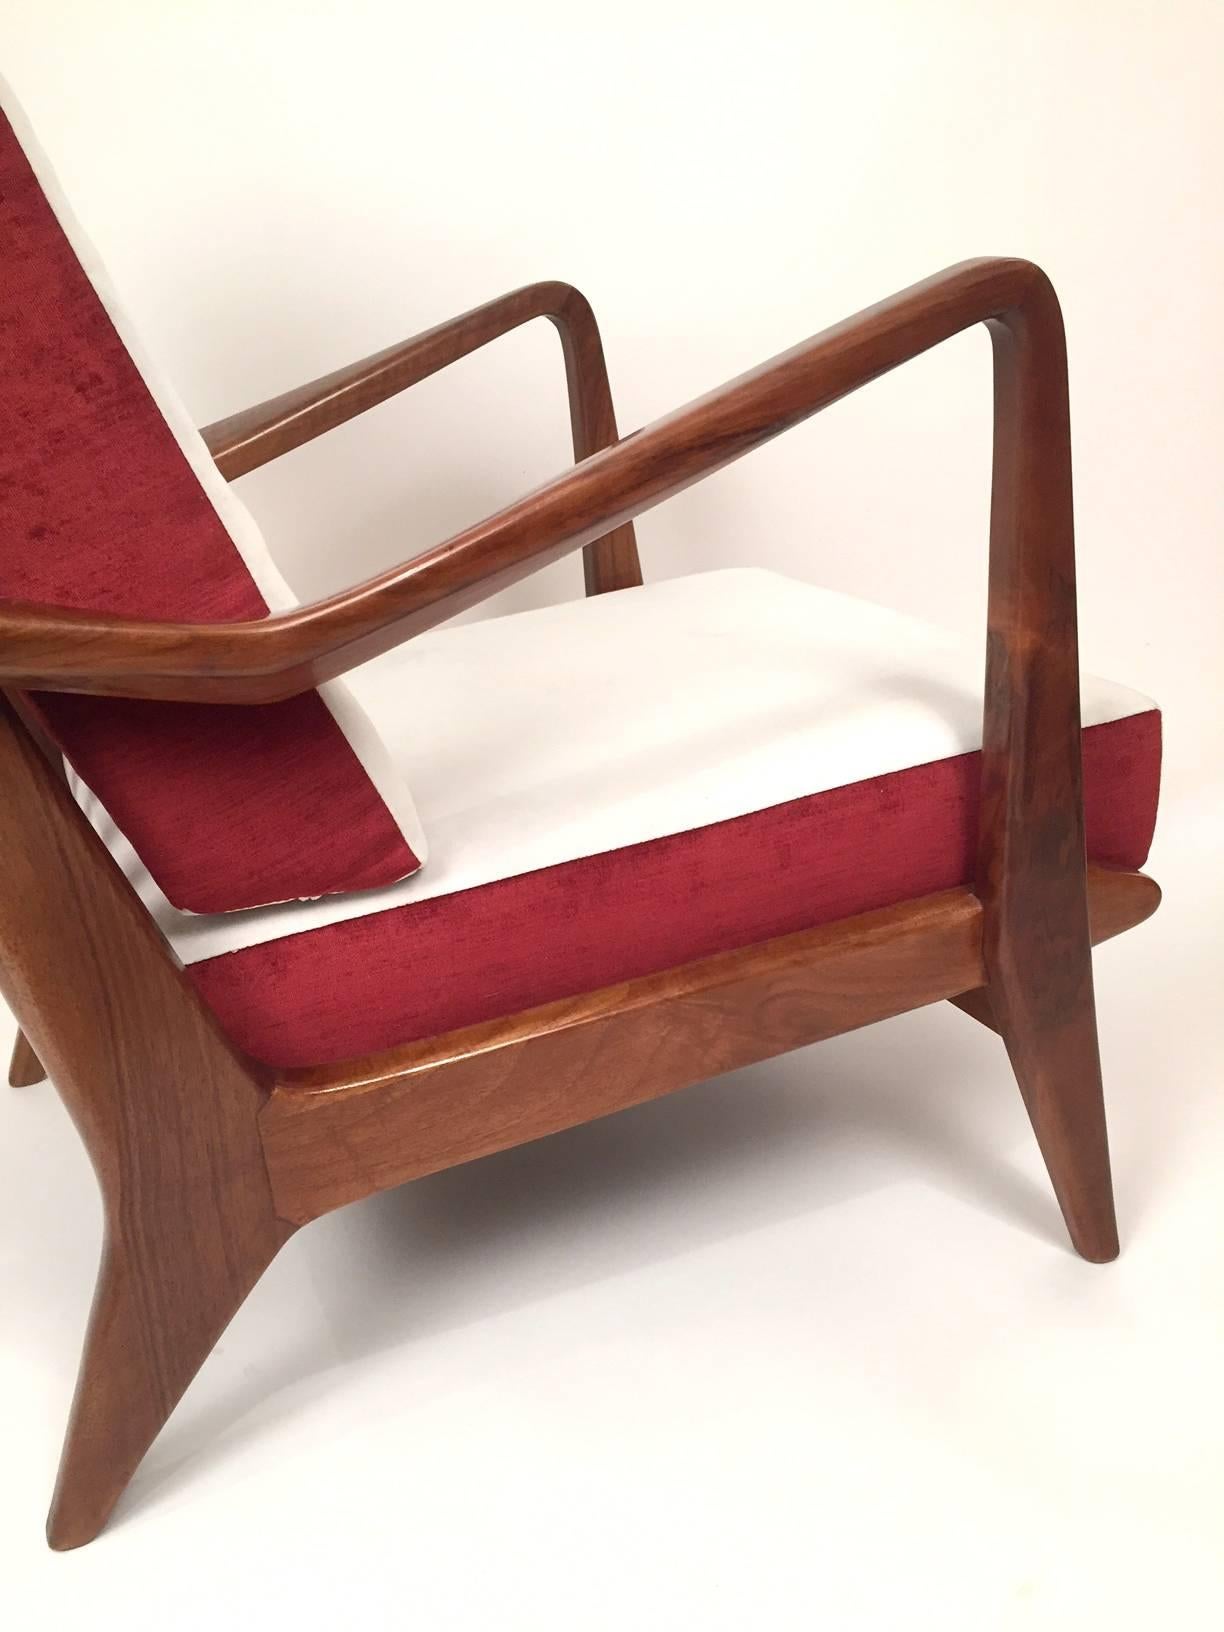 Pair of Gio Ponti Walnut Chairs Model No 516 for Cassina, 1950s 3